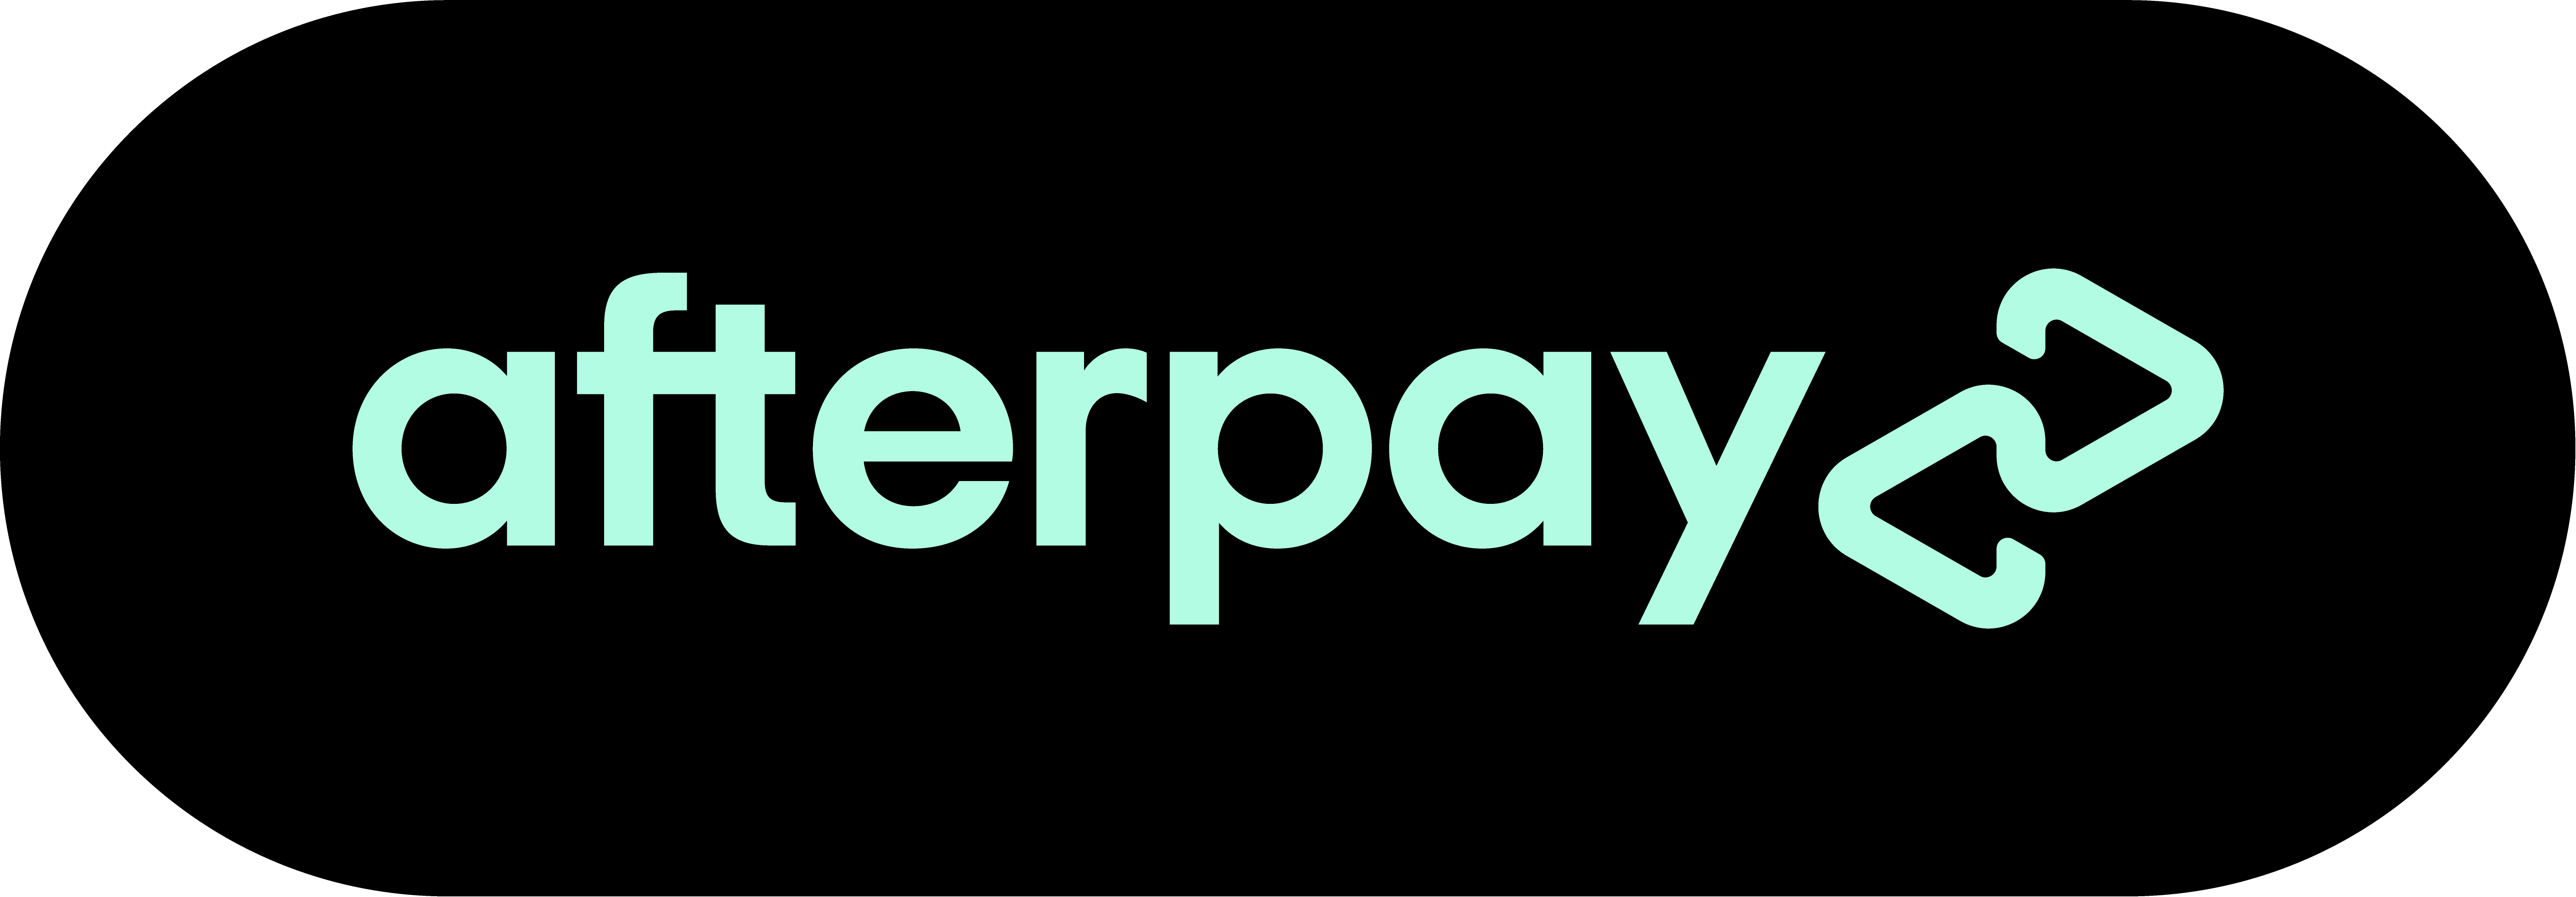 Dental Treatment with Afterpay | Finkelstein Dentist